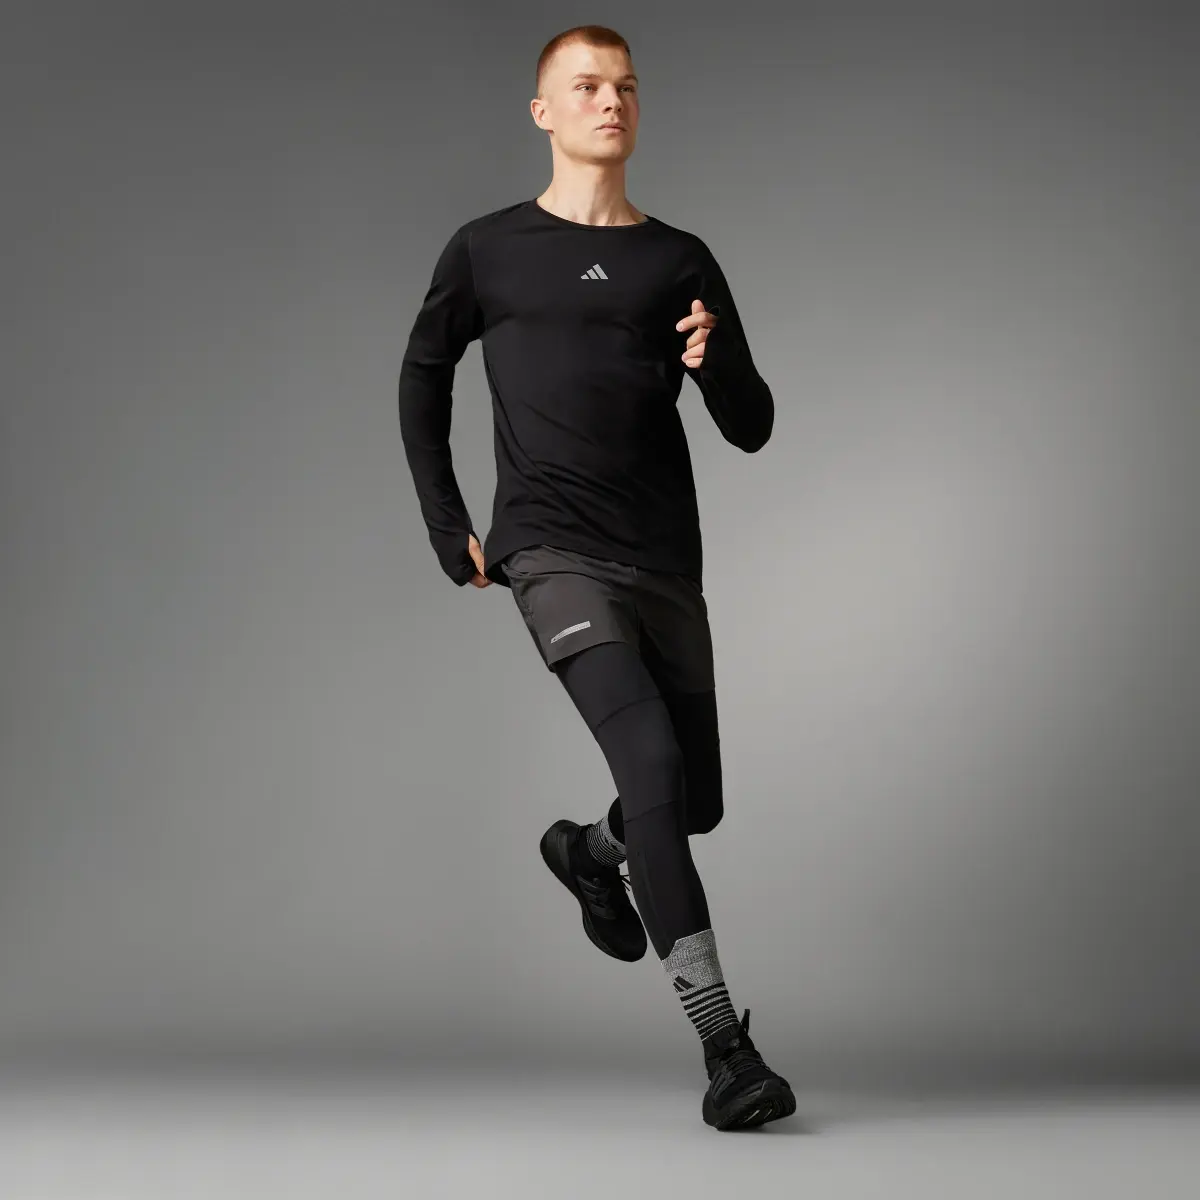 Adidas Ultimate Running Conquer the Elements Merino Long Sleeve Long-sleeve Top. 3